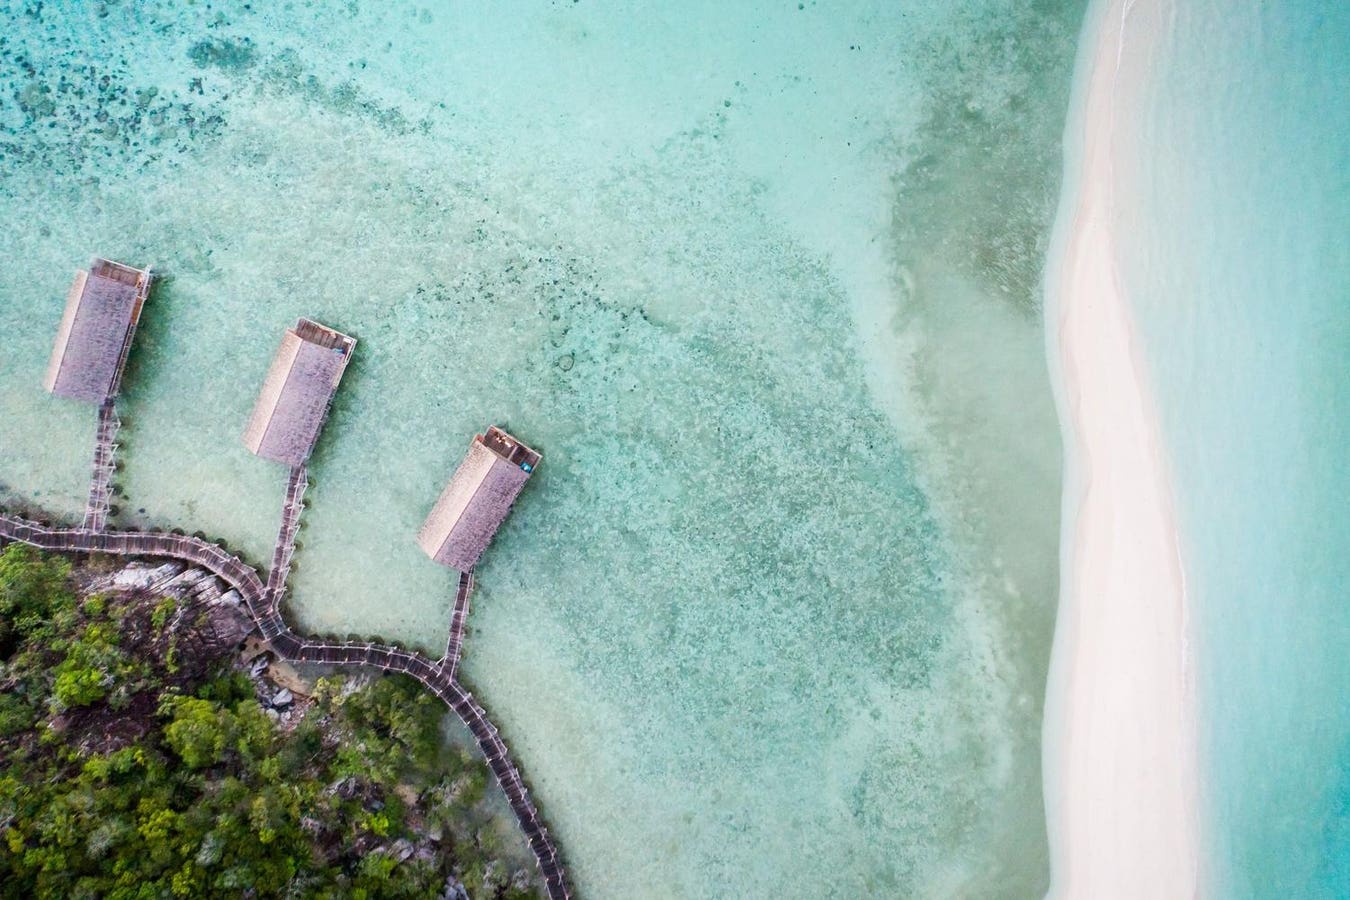 Zero Waste Weddings Are Trending. This Tropical Resort Aims To Make It Easy